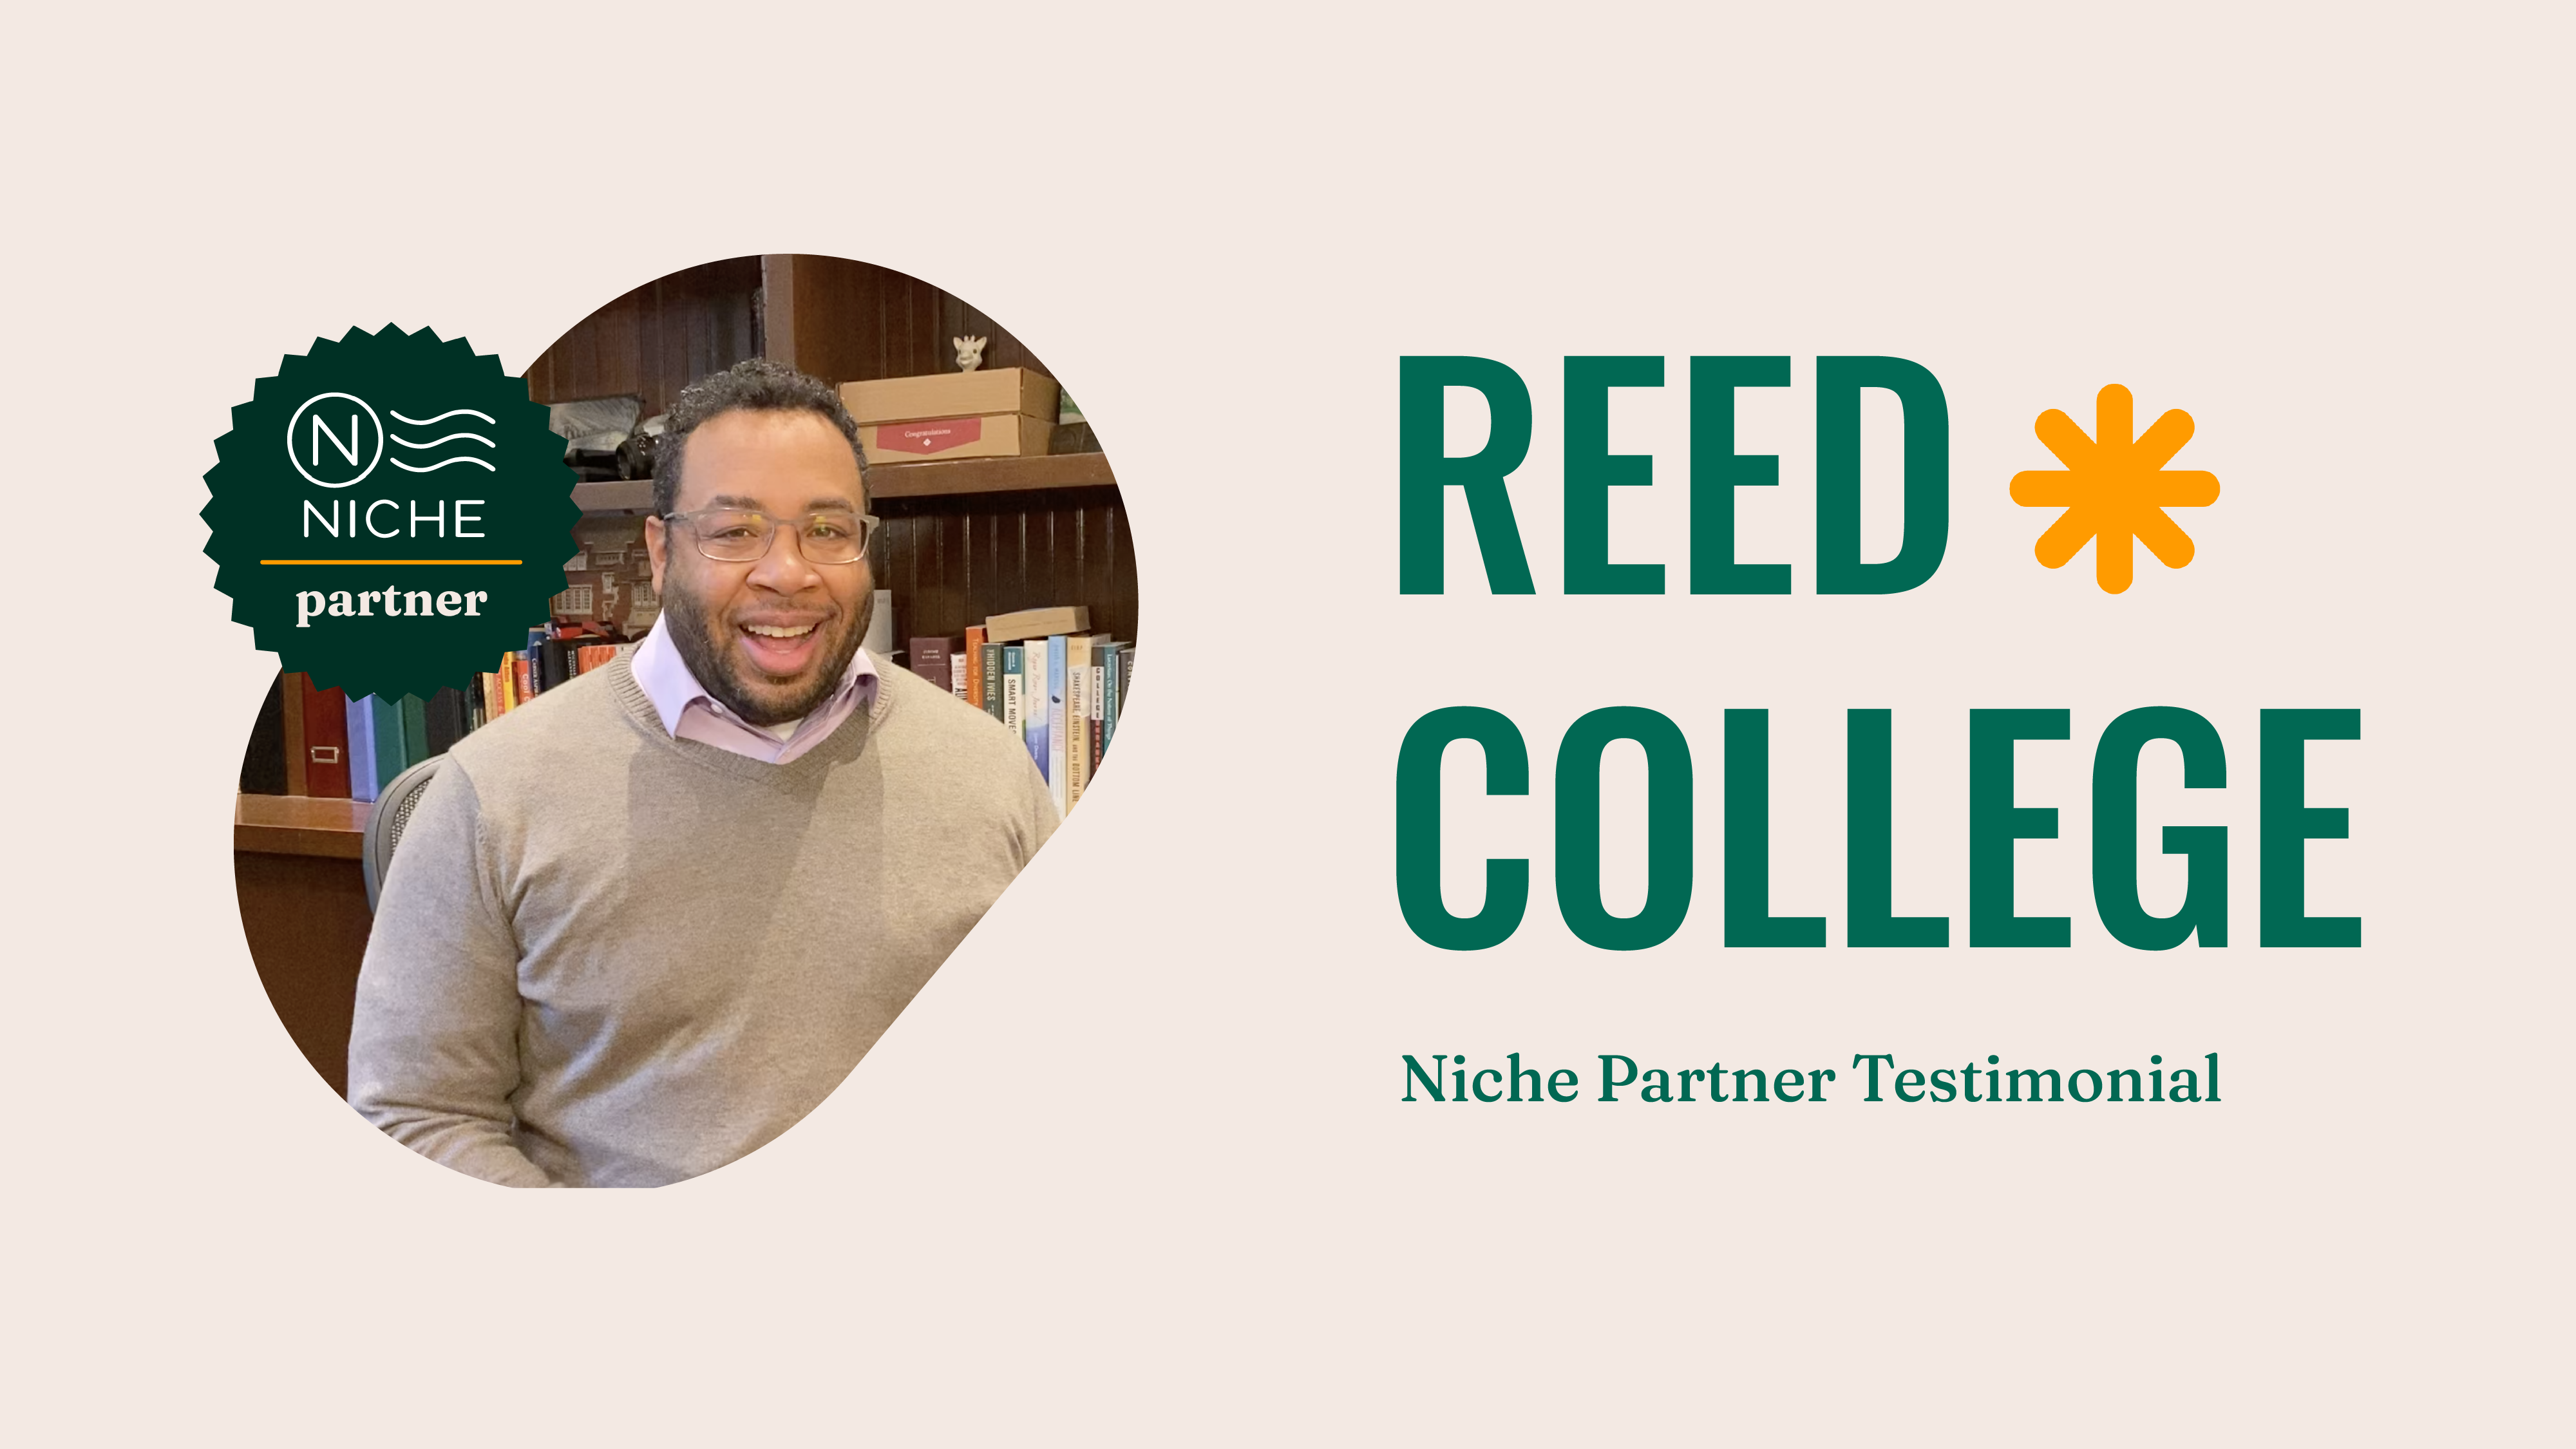 Reed College and Niche